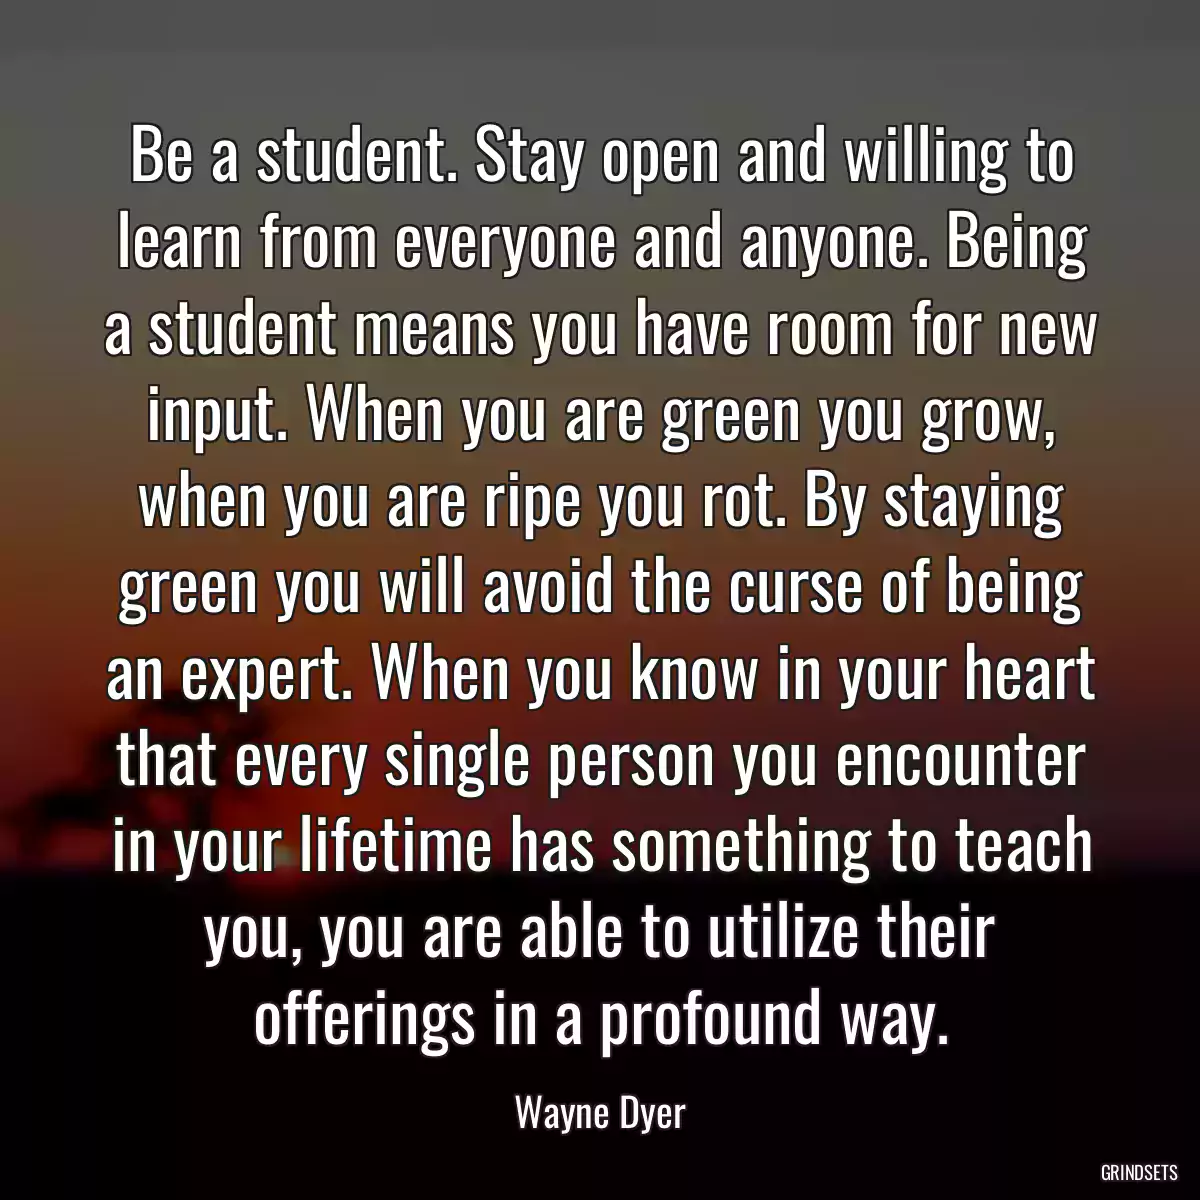 Be a student. Stay open and willing to learn from everyone and anyone. Being a student means you have room for new input. When you are green you grow, when you are ripe you rot. By staying green you will avoid the curse of being an expert. When you know in your heart that every single person you encounter in your lifetime has something to teach you, you are able to utilize their offerings in a profound way.